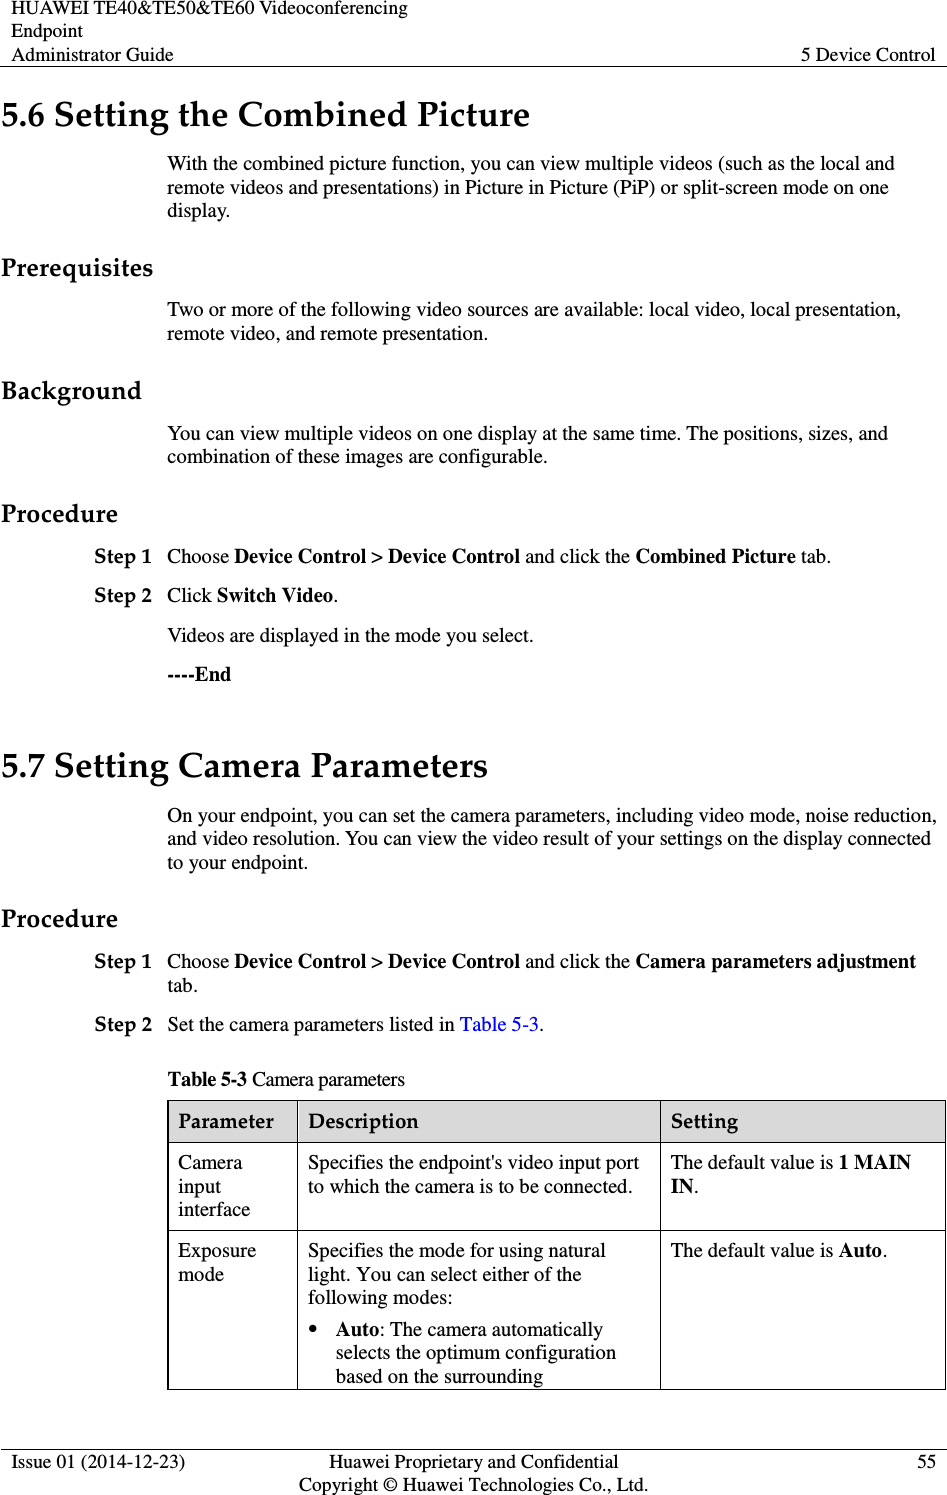 HUAWEI TE40&amp;TE50&amp;TE60 Videoconferencing Endpoint Administrator Guide  5 Device Control  Issue 01 (2014-12-23)  Huawei Proprietary and Confidential                                     Copyright © Huawei Technologies Co., Ltd. 55  5.6 Setting the Combined Picture With the combined picture function, you can view multiple videos (such as the local and remote videos and presentations) in Picture in Picture (PiP) or split-screen mode on one display. Prerequisites Two or more of the following video sources are available: local video, local presentation, remote video, and remote presentation. Background You can view multiple videos on one display at the same time. The positions, sizes, and combination of these images are configurable. Procedure Step 1 Choose Device Control &gt; Device Control and click the Combined Picture tab. Step 2 Click Switch Video. Videos are displayed in the mode you select. ----End 5.7 Setting Camera Parameters On your endpoint, you can set the camera parameters, including video mode, noise reduction, and video resolution. You can view the video result of your settings on the display connected to your endpoint.   Procedure Step 1 Choose Device Control &gt; Device Control and click the Camera parameters adjustment tab.   Step 2 Set the camera parameters listed in Table 5-3. Table 5-3 Camera parameters Parameter  Description  Setting Camera input interface Specifies the endpoint&apos;s video input port to which the camera is to be connected. The default value is 1 MAIN IN. Exposure mode Specifies the mode for using natural light. You can select either of the following modes:  Auto: The camera automatically selects the optimum configuration based on the surrounding The default value is Auto.   